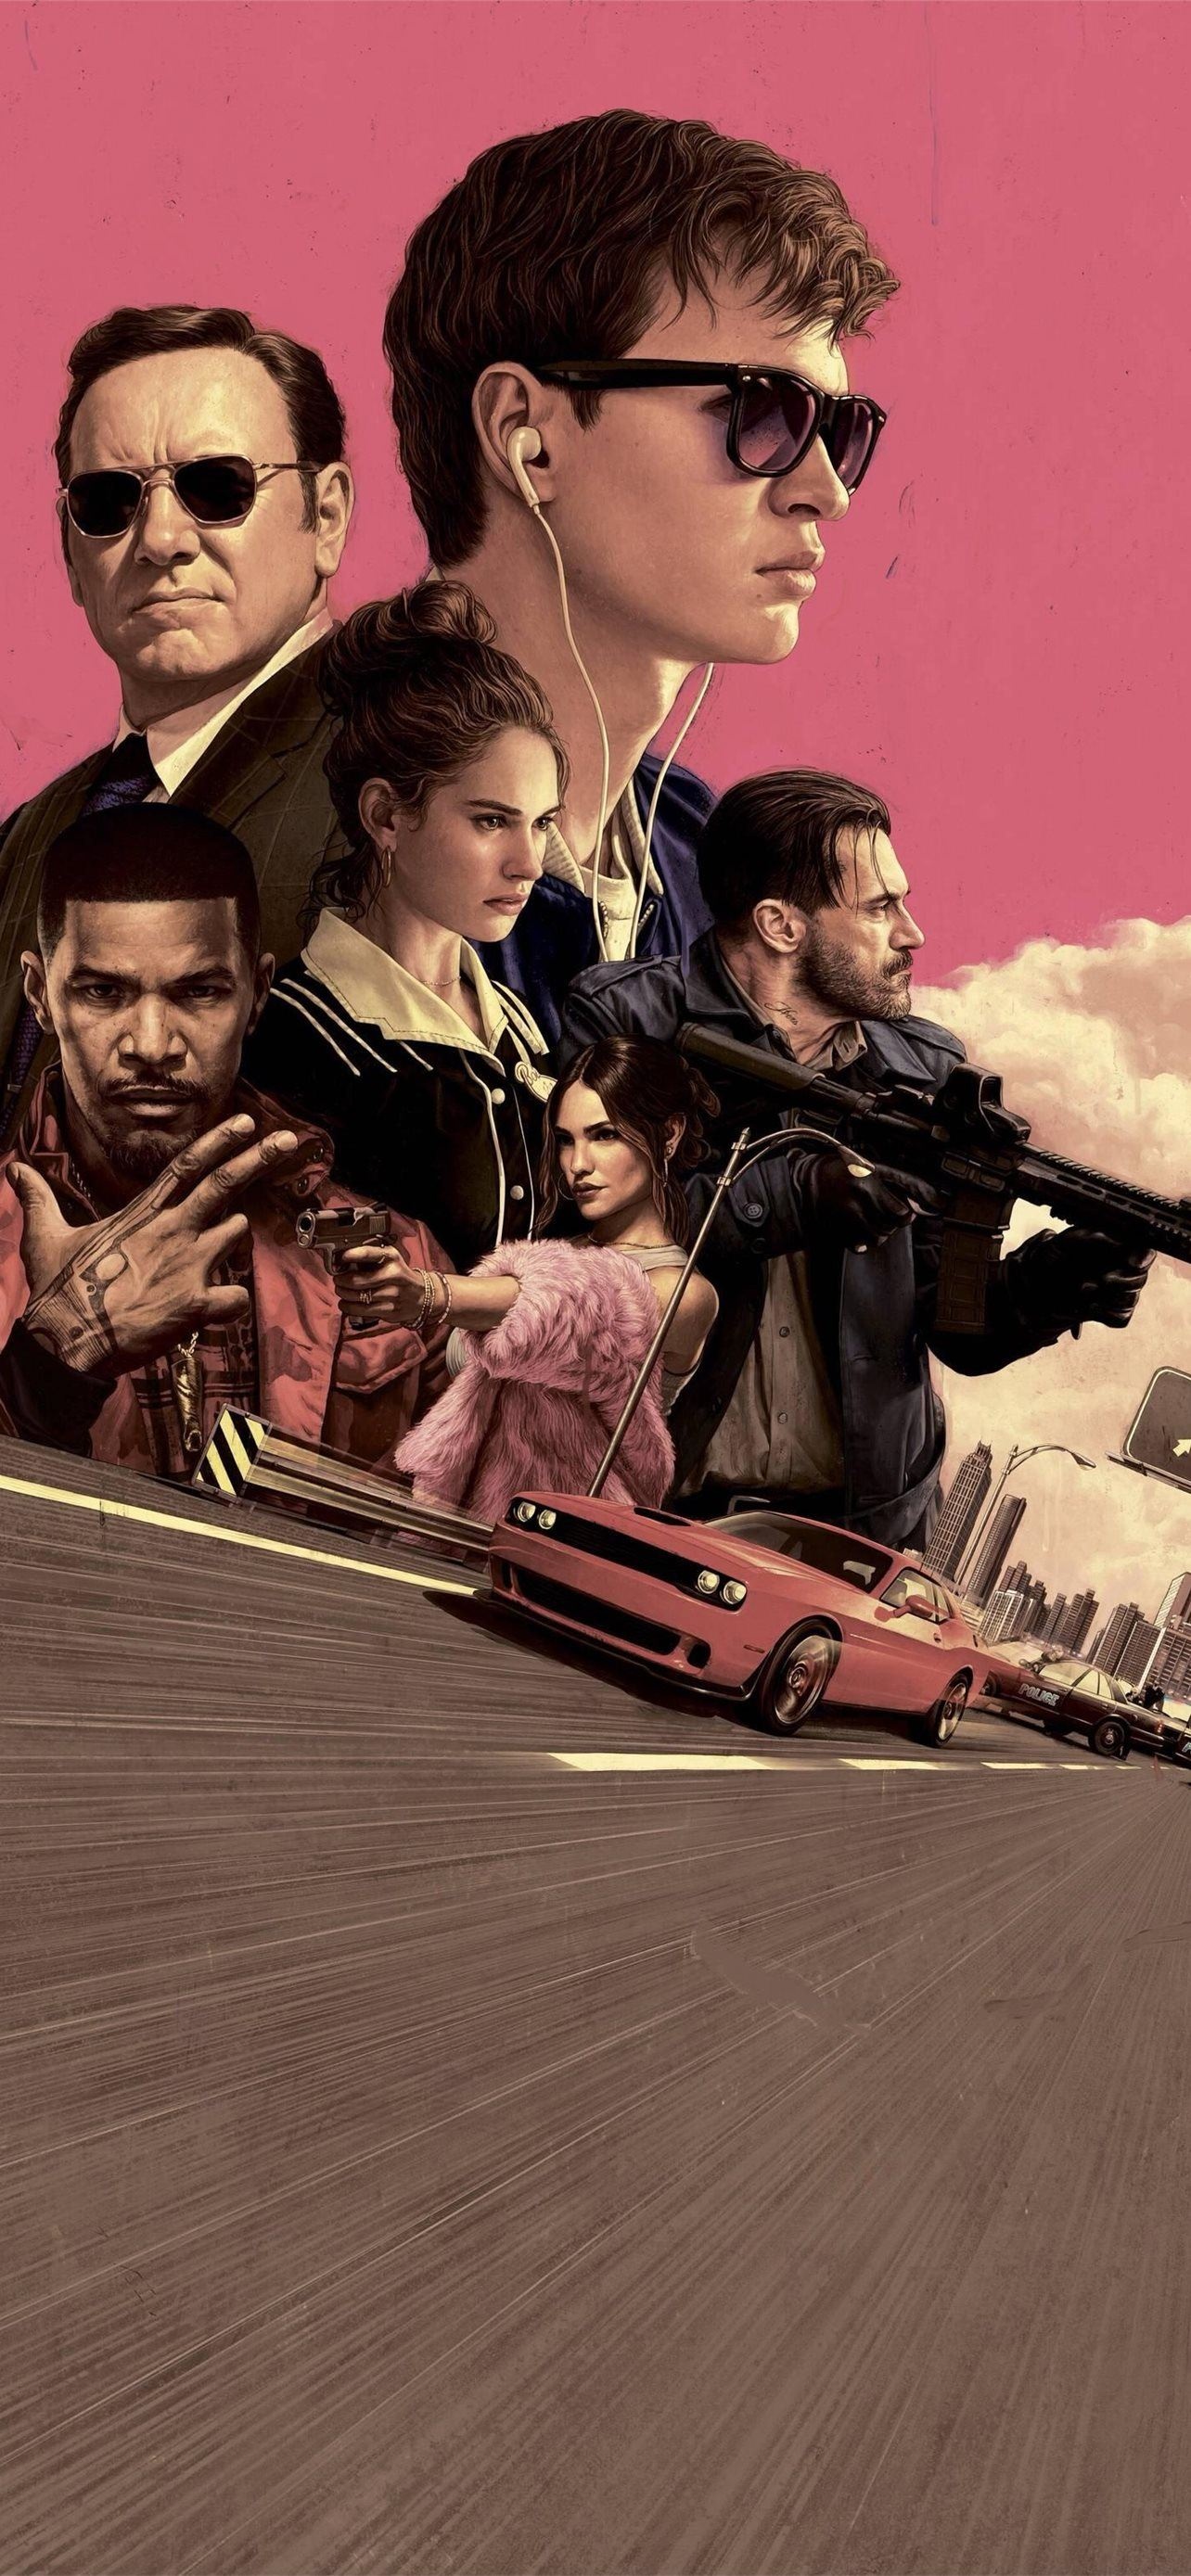 Baby Driver iPhone wallpapers, Stylish images, Movie characters, Speedy cars, 1290x2780 HD Phone